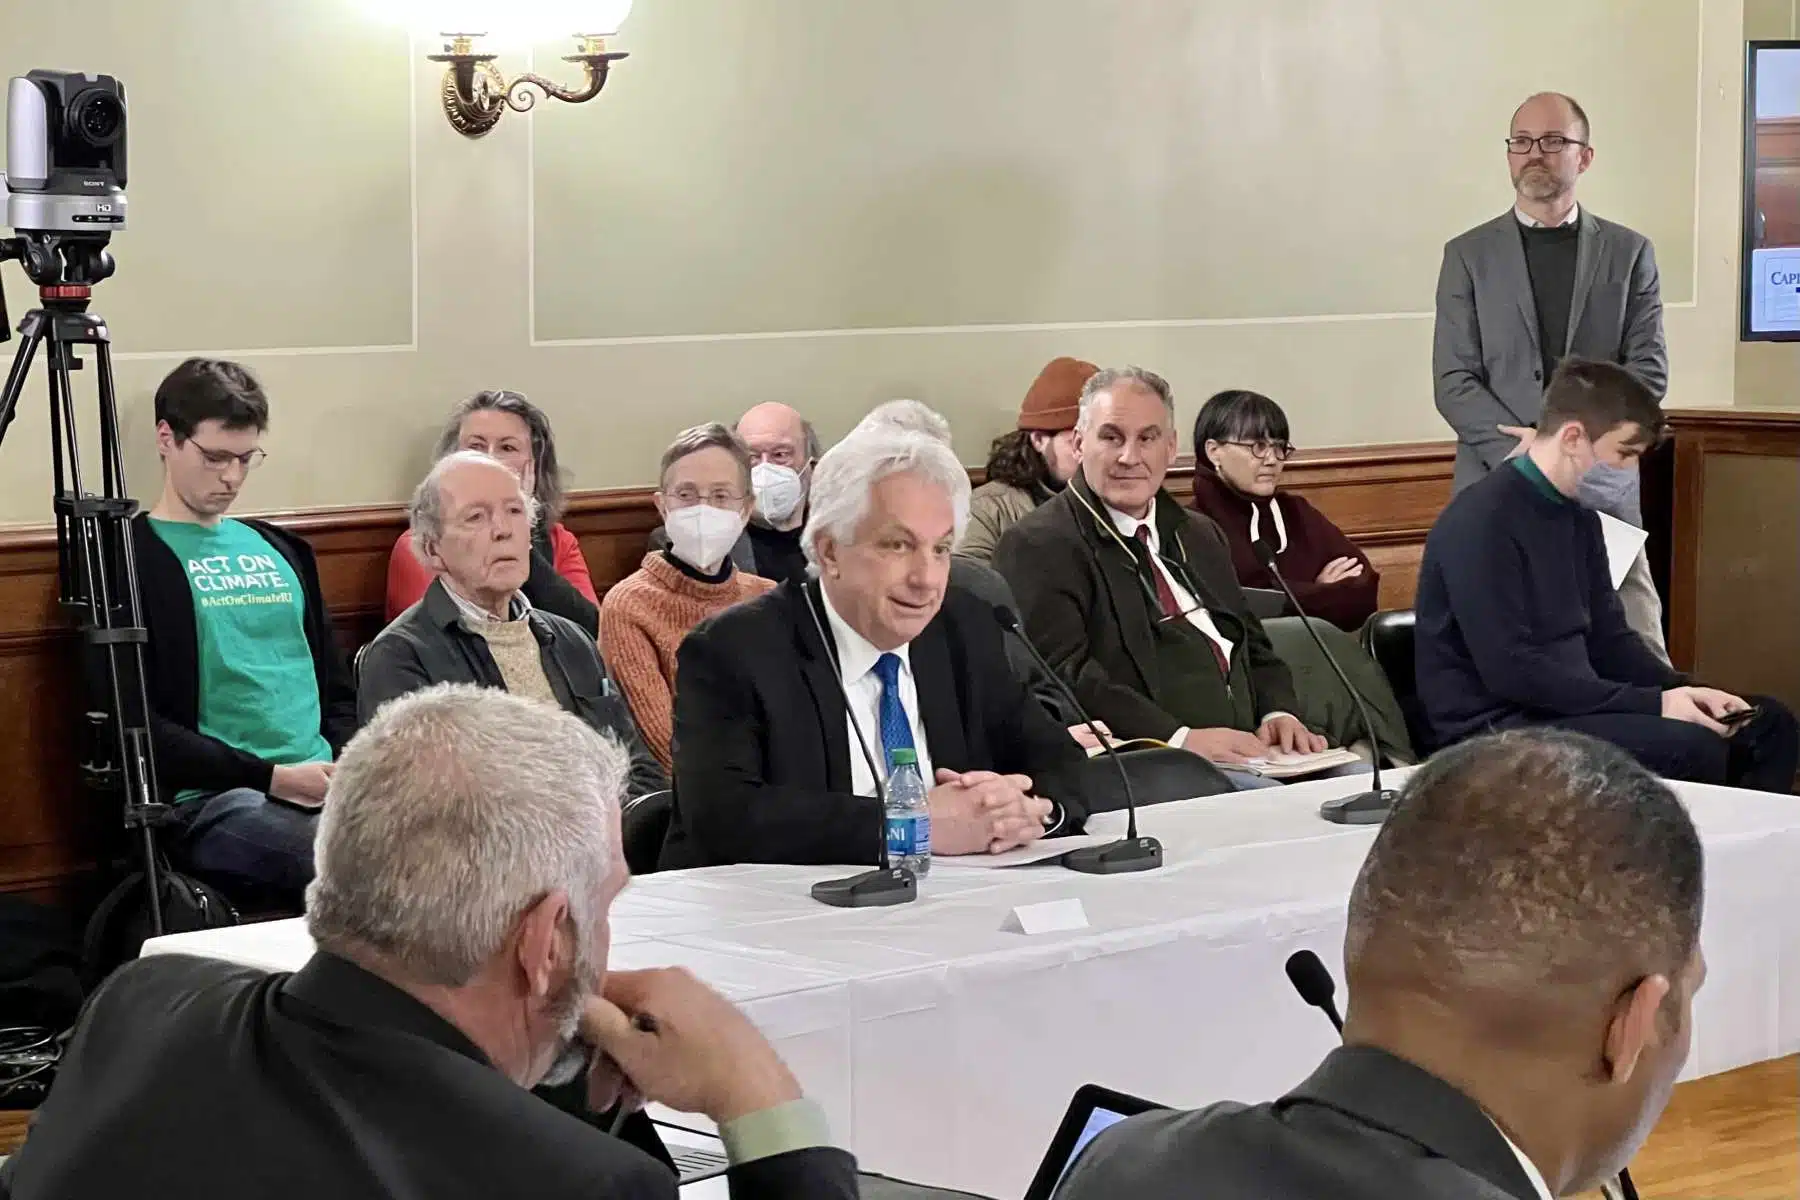 Senate Finance hearing for RIDOT Director ignores concerns, hit-and-run victim’s story interrupted